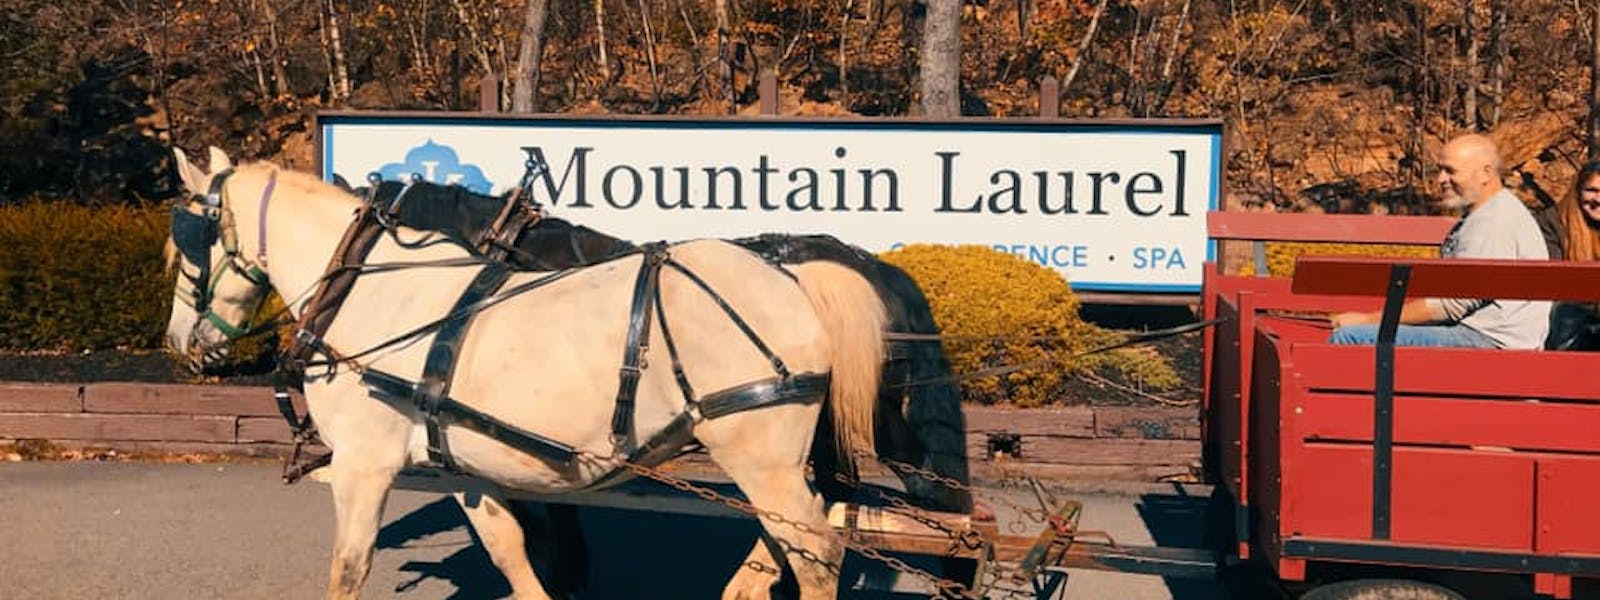 Horse back Riding at Mountain Laurel Resort Stables